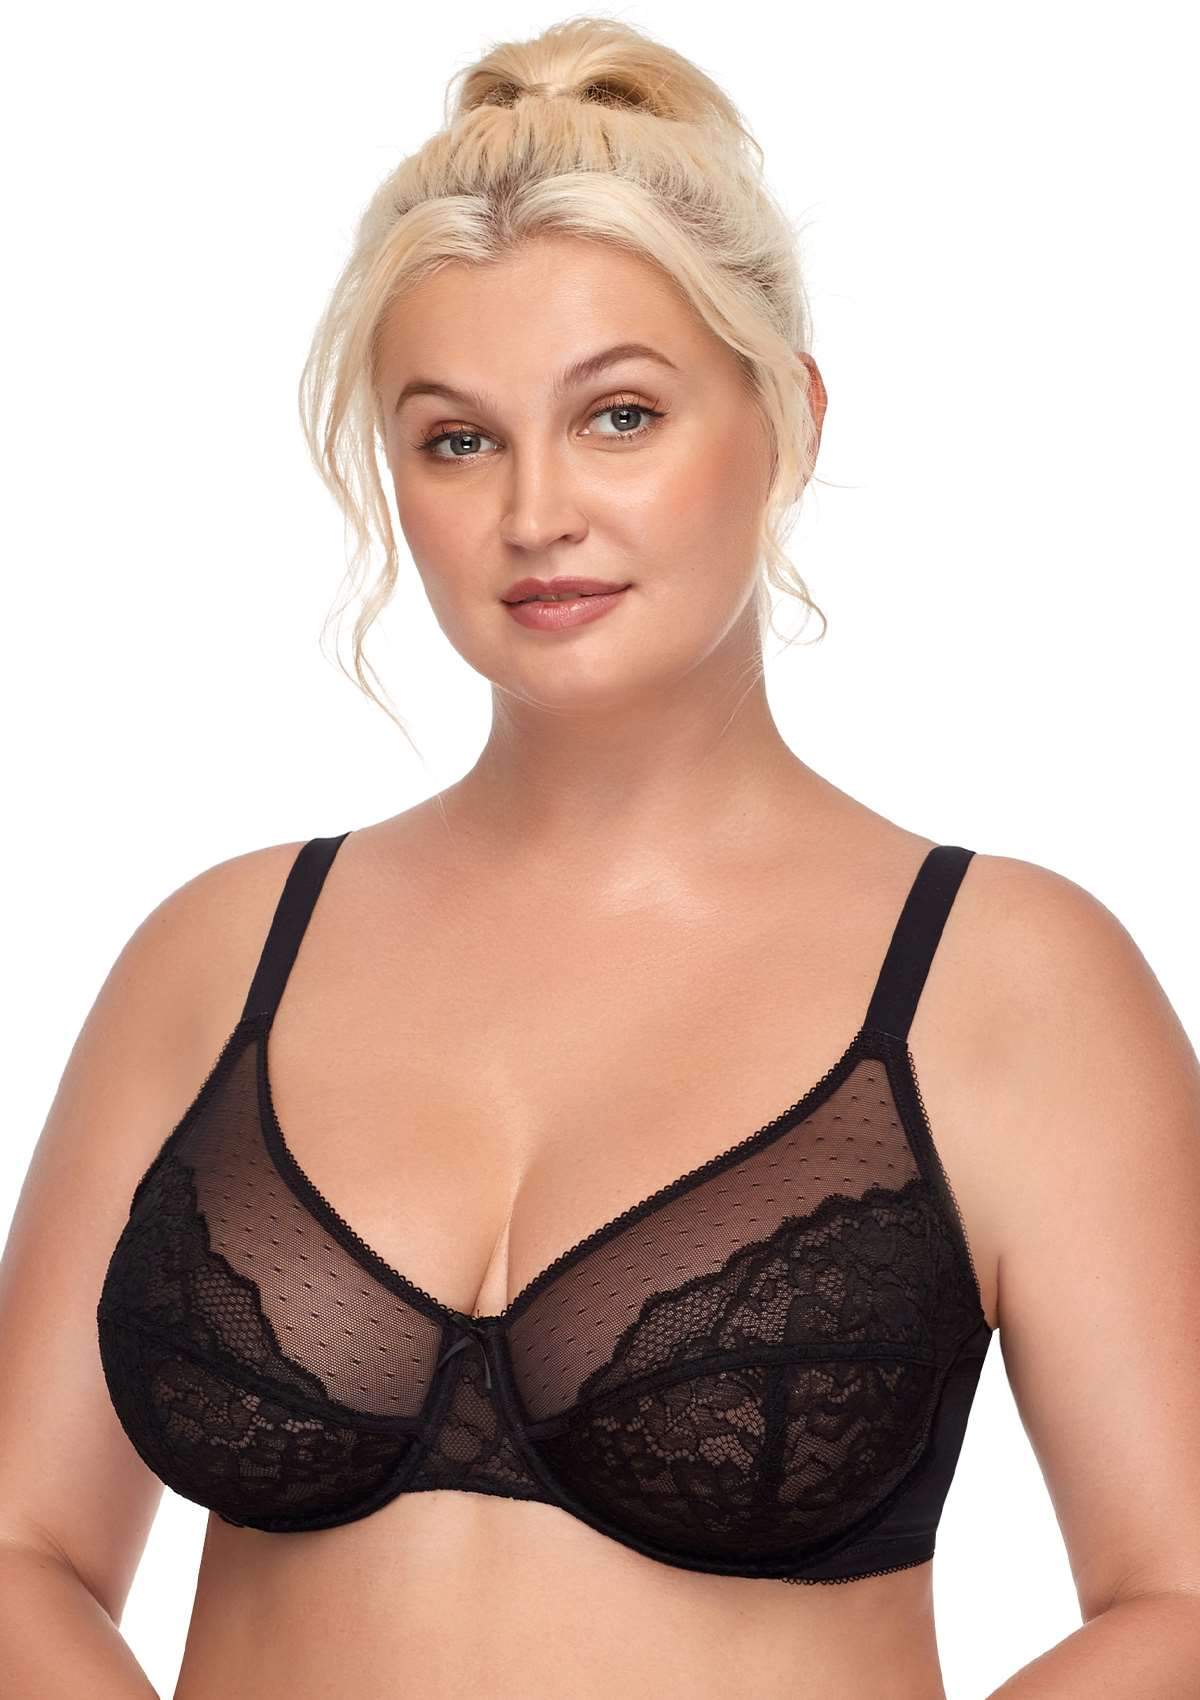 HSIA Enchante Lace Wire Bra For Lifting And Separating Large Breasts - Black / 40 / C